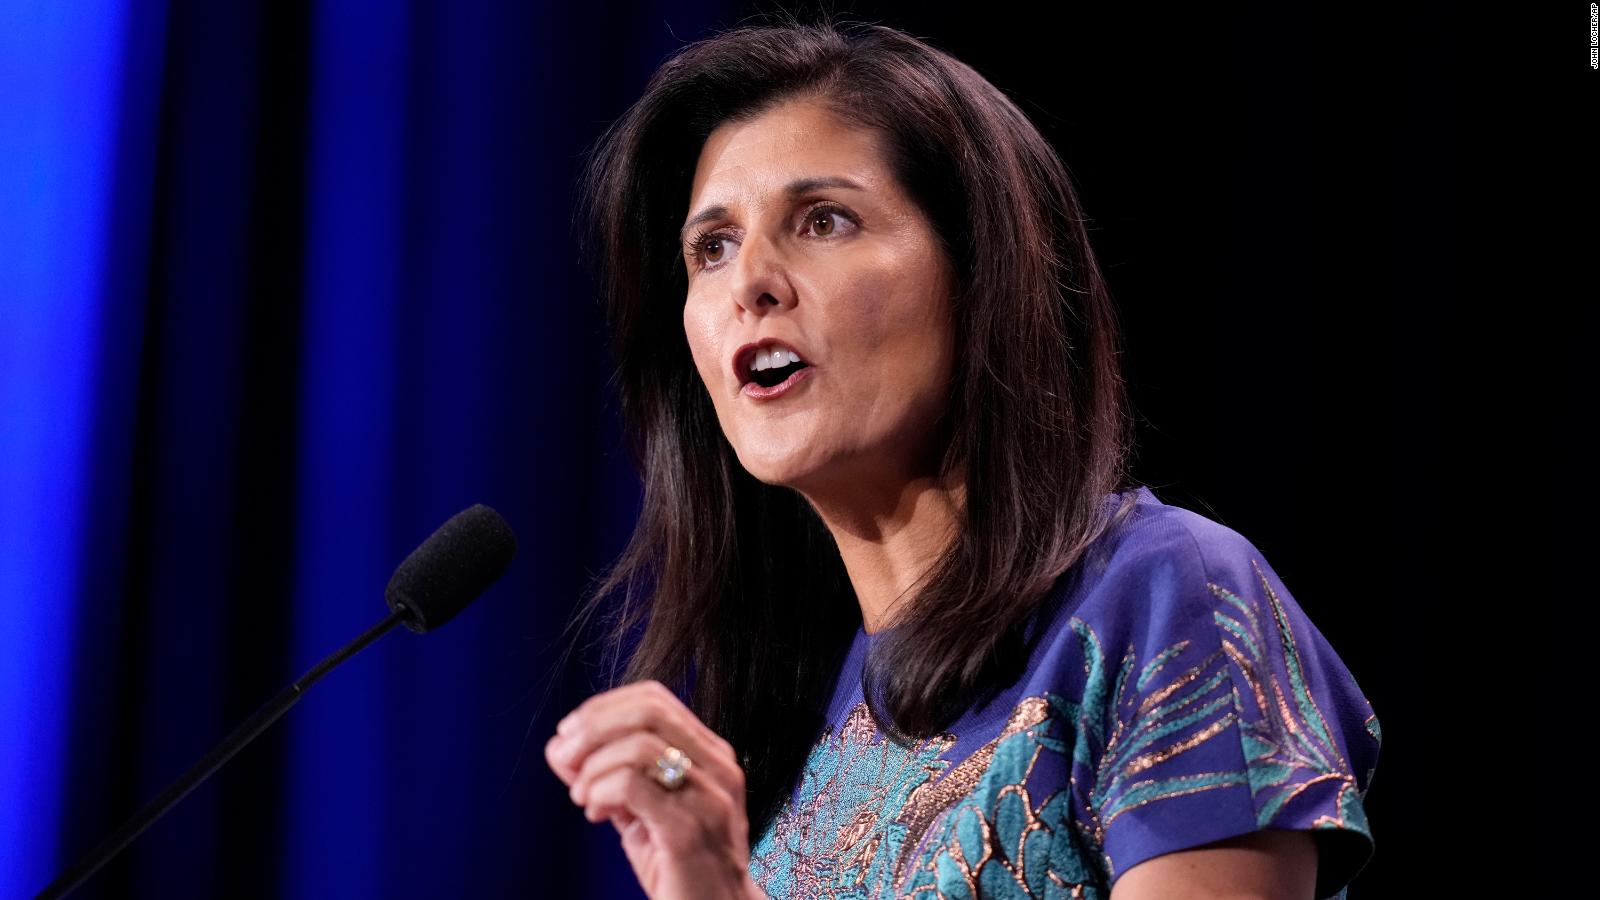 Nikki Haley expected to announce presidential run in Charleston on